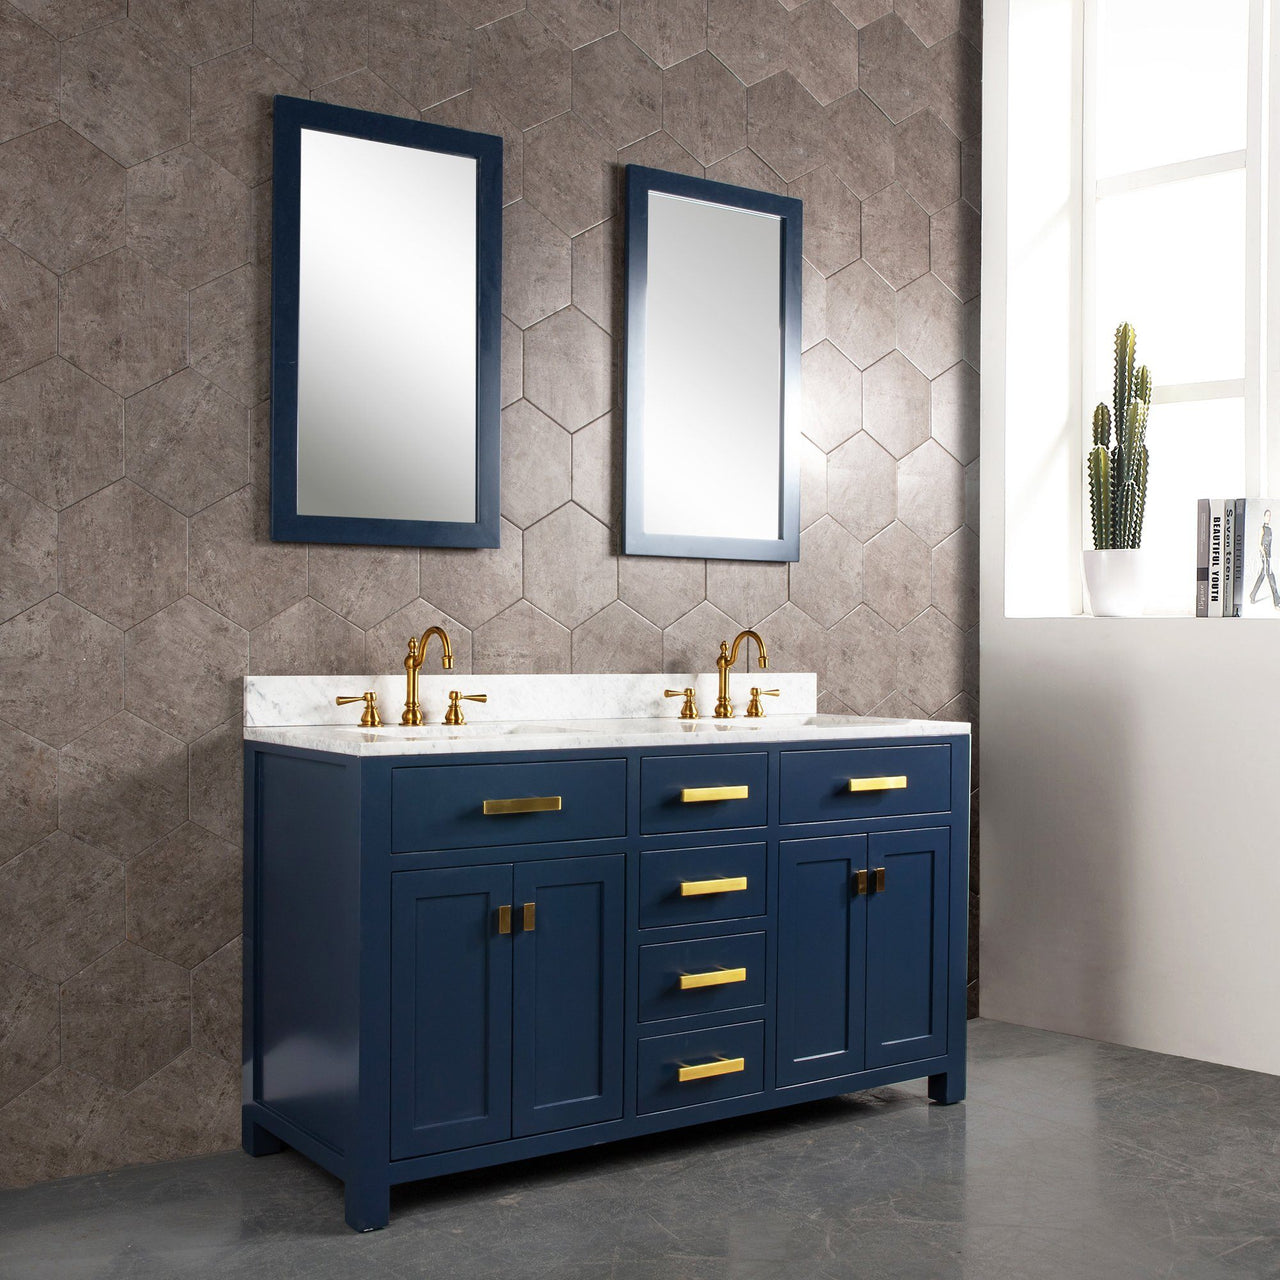 Madison 60-Inch Double Sink Carrara White Marble Vanity In Monarch BlueWith Matching Mirror(s) and F2-0012-06-TL Lavatory Faucet(s) Vanity Water Creation 